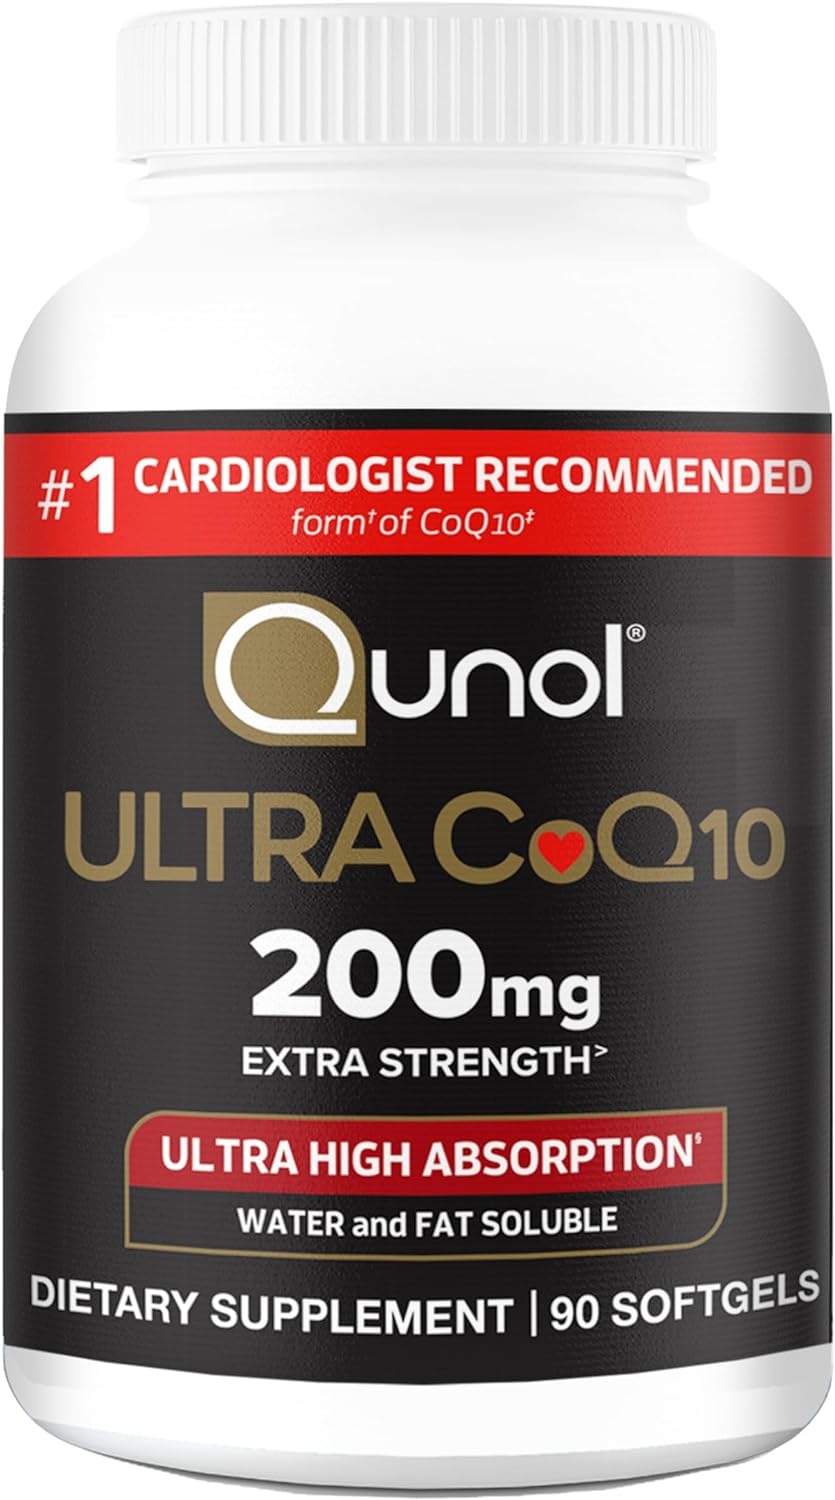 Qunol CoQ10 200mg Softgels, Ultra CoQ10 - Ultra High Absorption Coenzyme Q10 Supplements - Antioxidant Supplement for Vascular and Heart Health & Energy Production, 90 Count